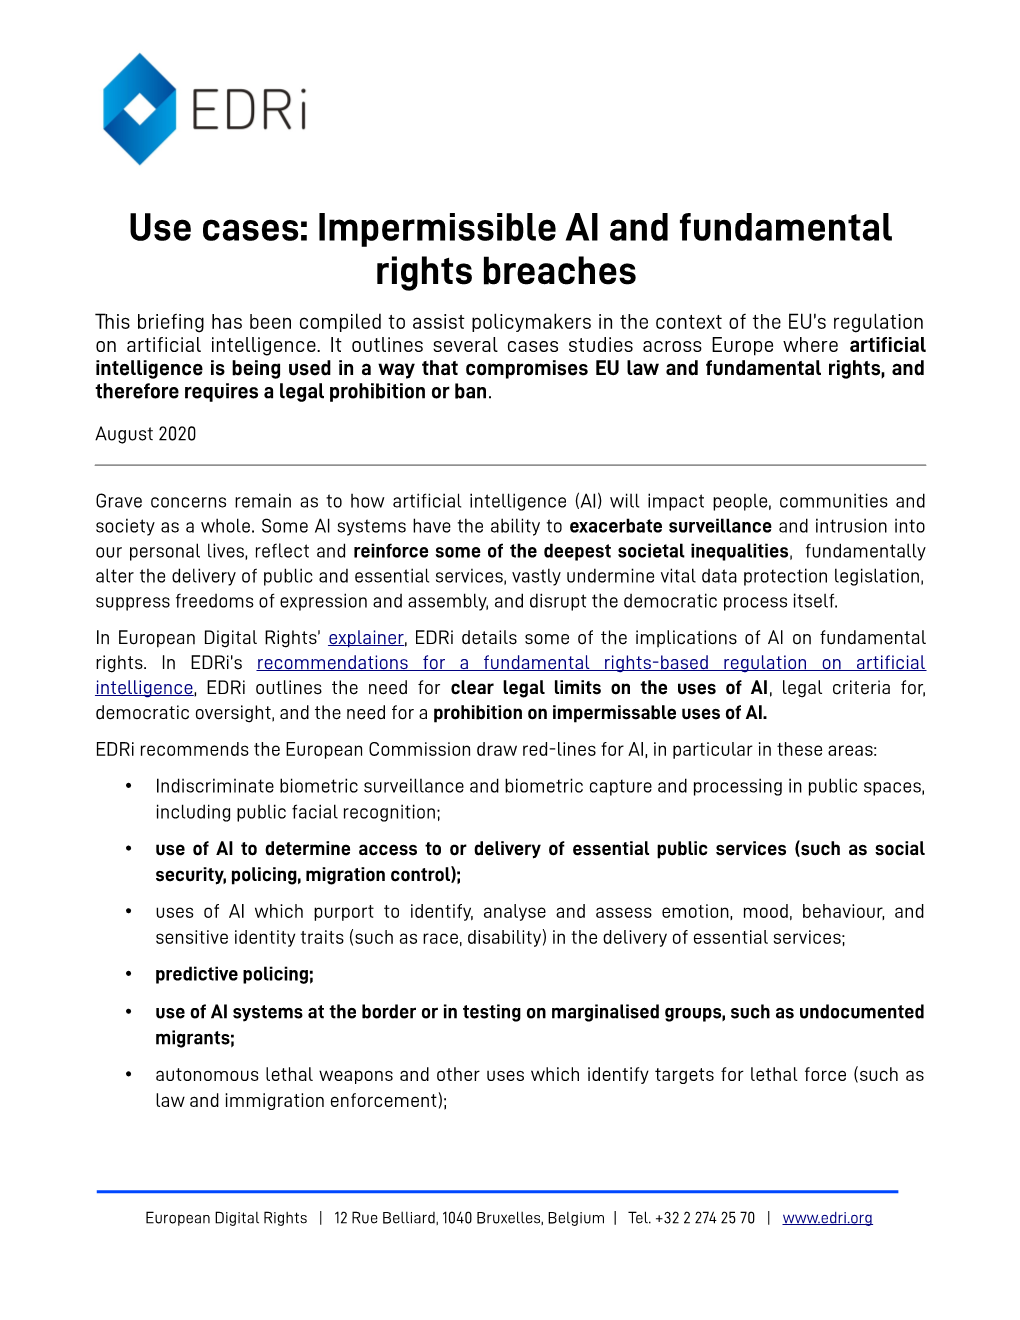 Use Cases: Impermissible AI and Fundamental Rights Breaches